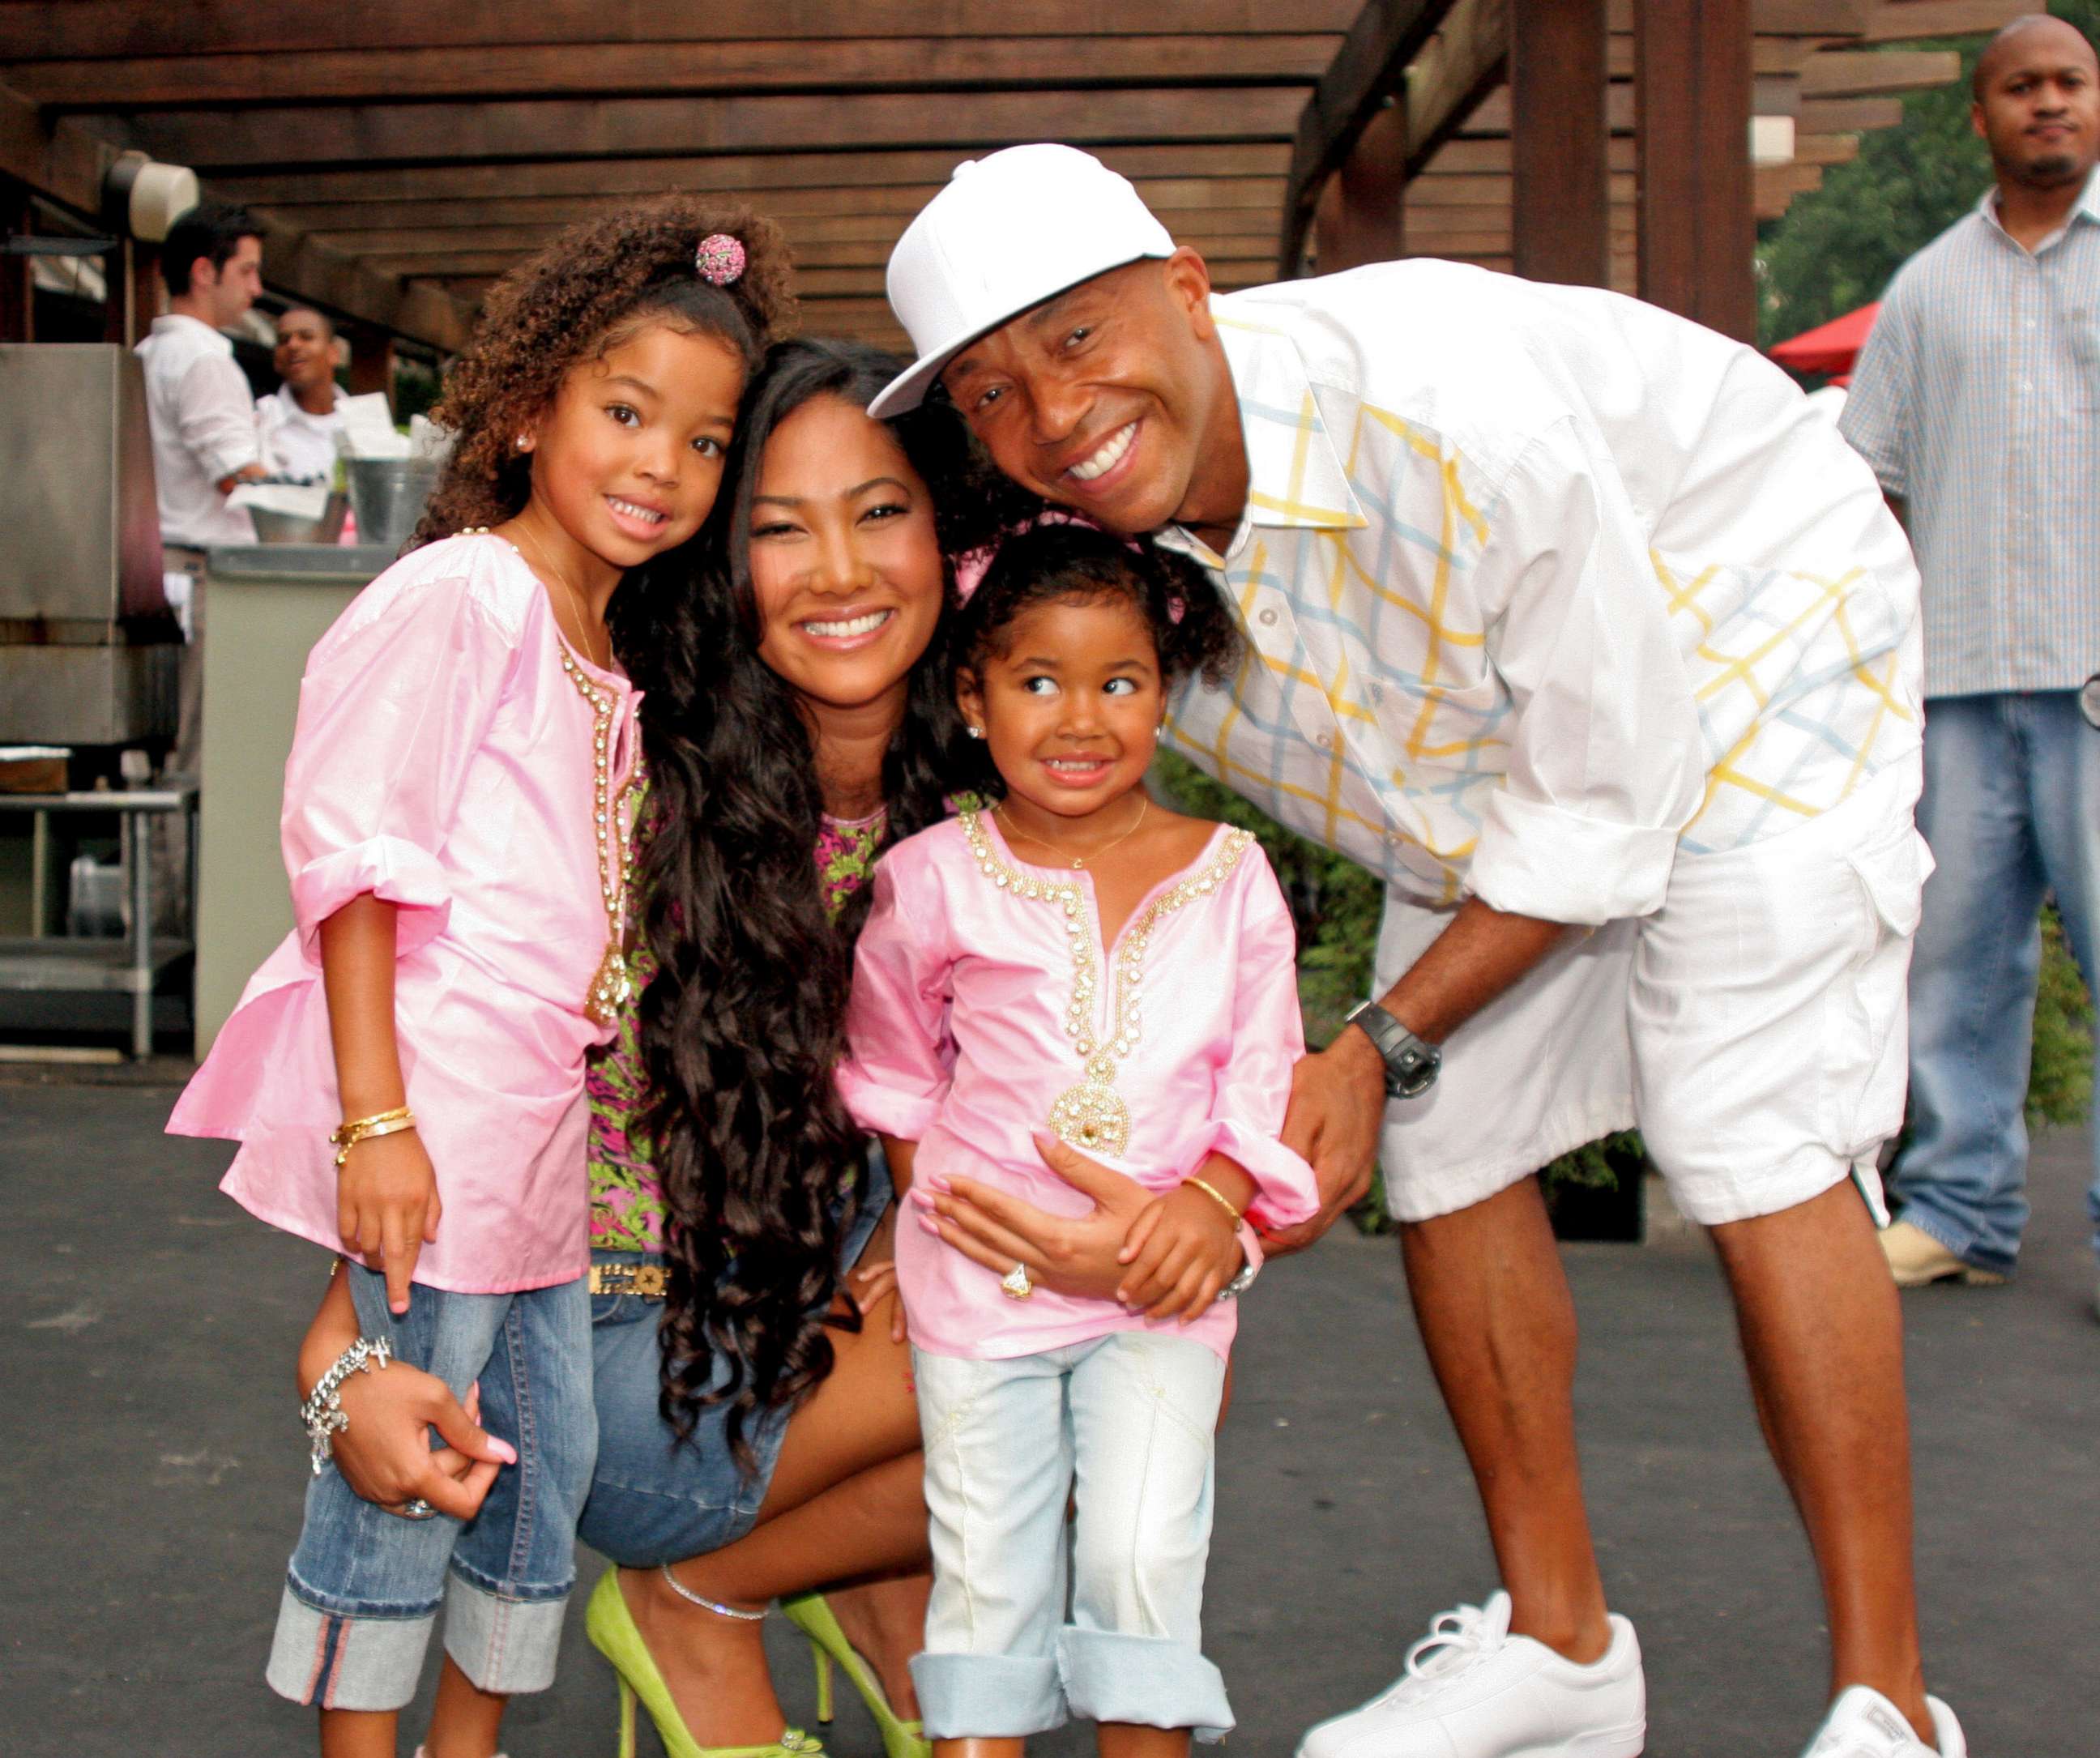 PHOTO: Pictured (L-R) are Ming Lee Simmons, Kimora Lee Simmons, Aoki Simmons and Russell Simmons, Aug. 14, 2005. 